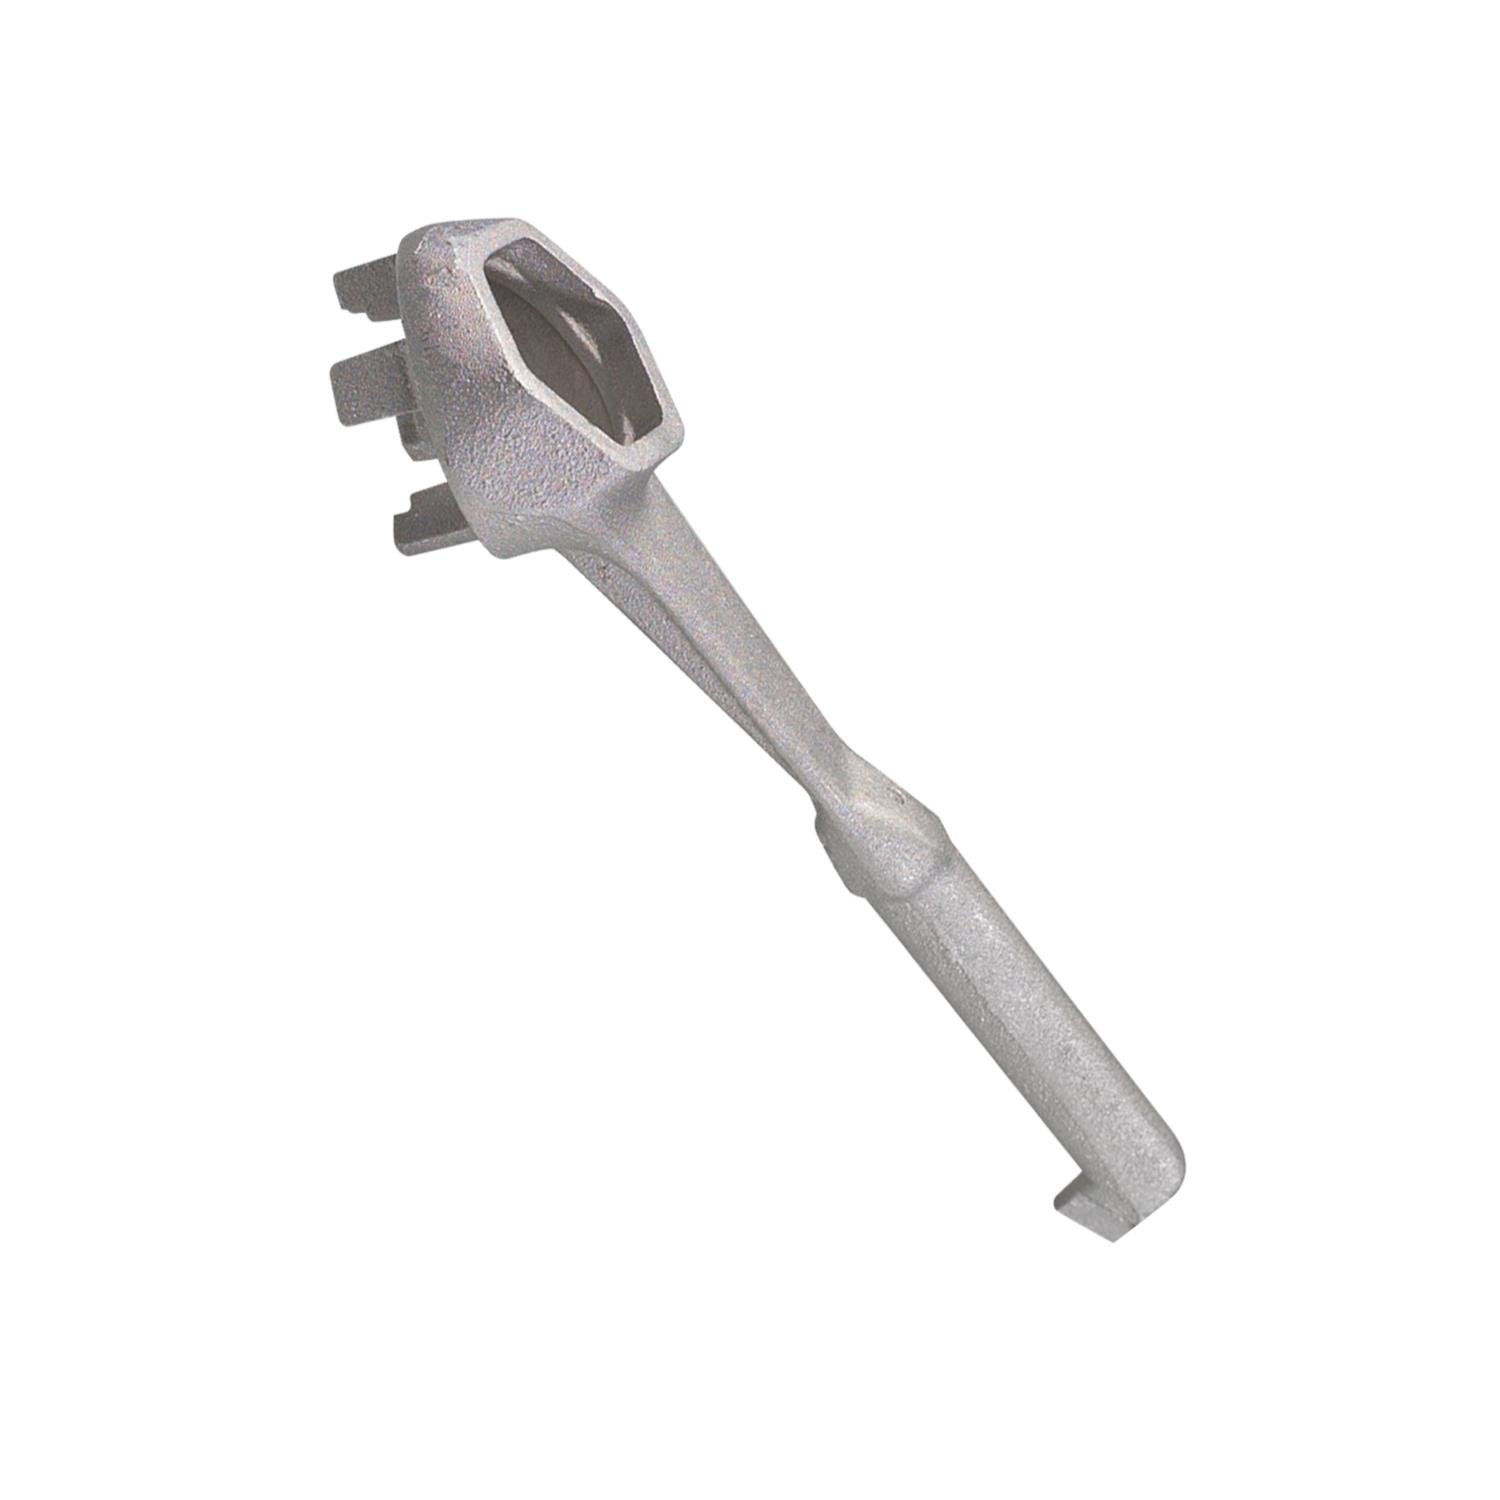 WRENCH FOR 55 GAL DRUM